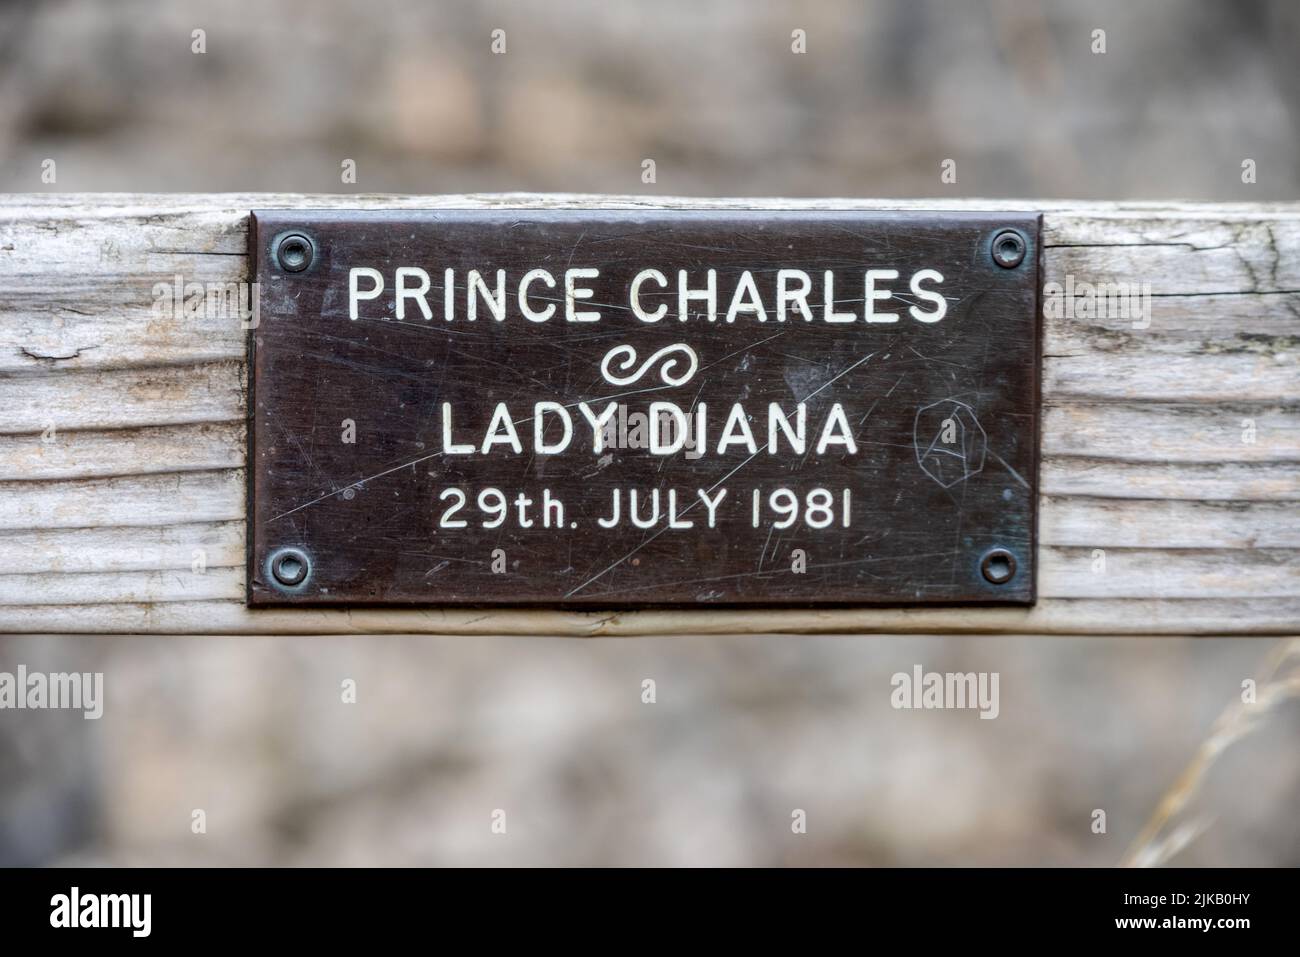 Lower Slaughter, July 26th 2022: Commemorative plaque for the wedding of Prince Charles And Lady Diana Spencer in 1981 Stock Photo